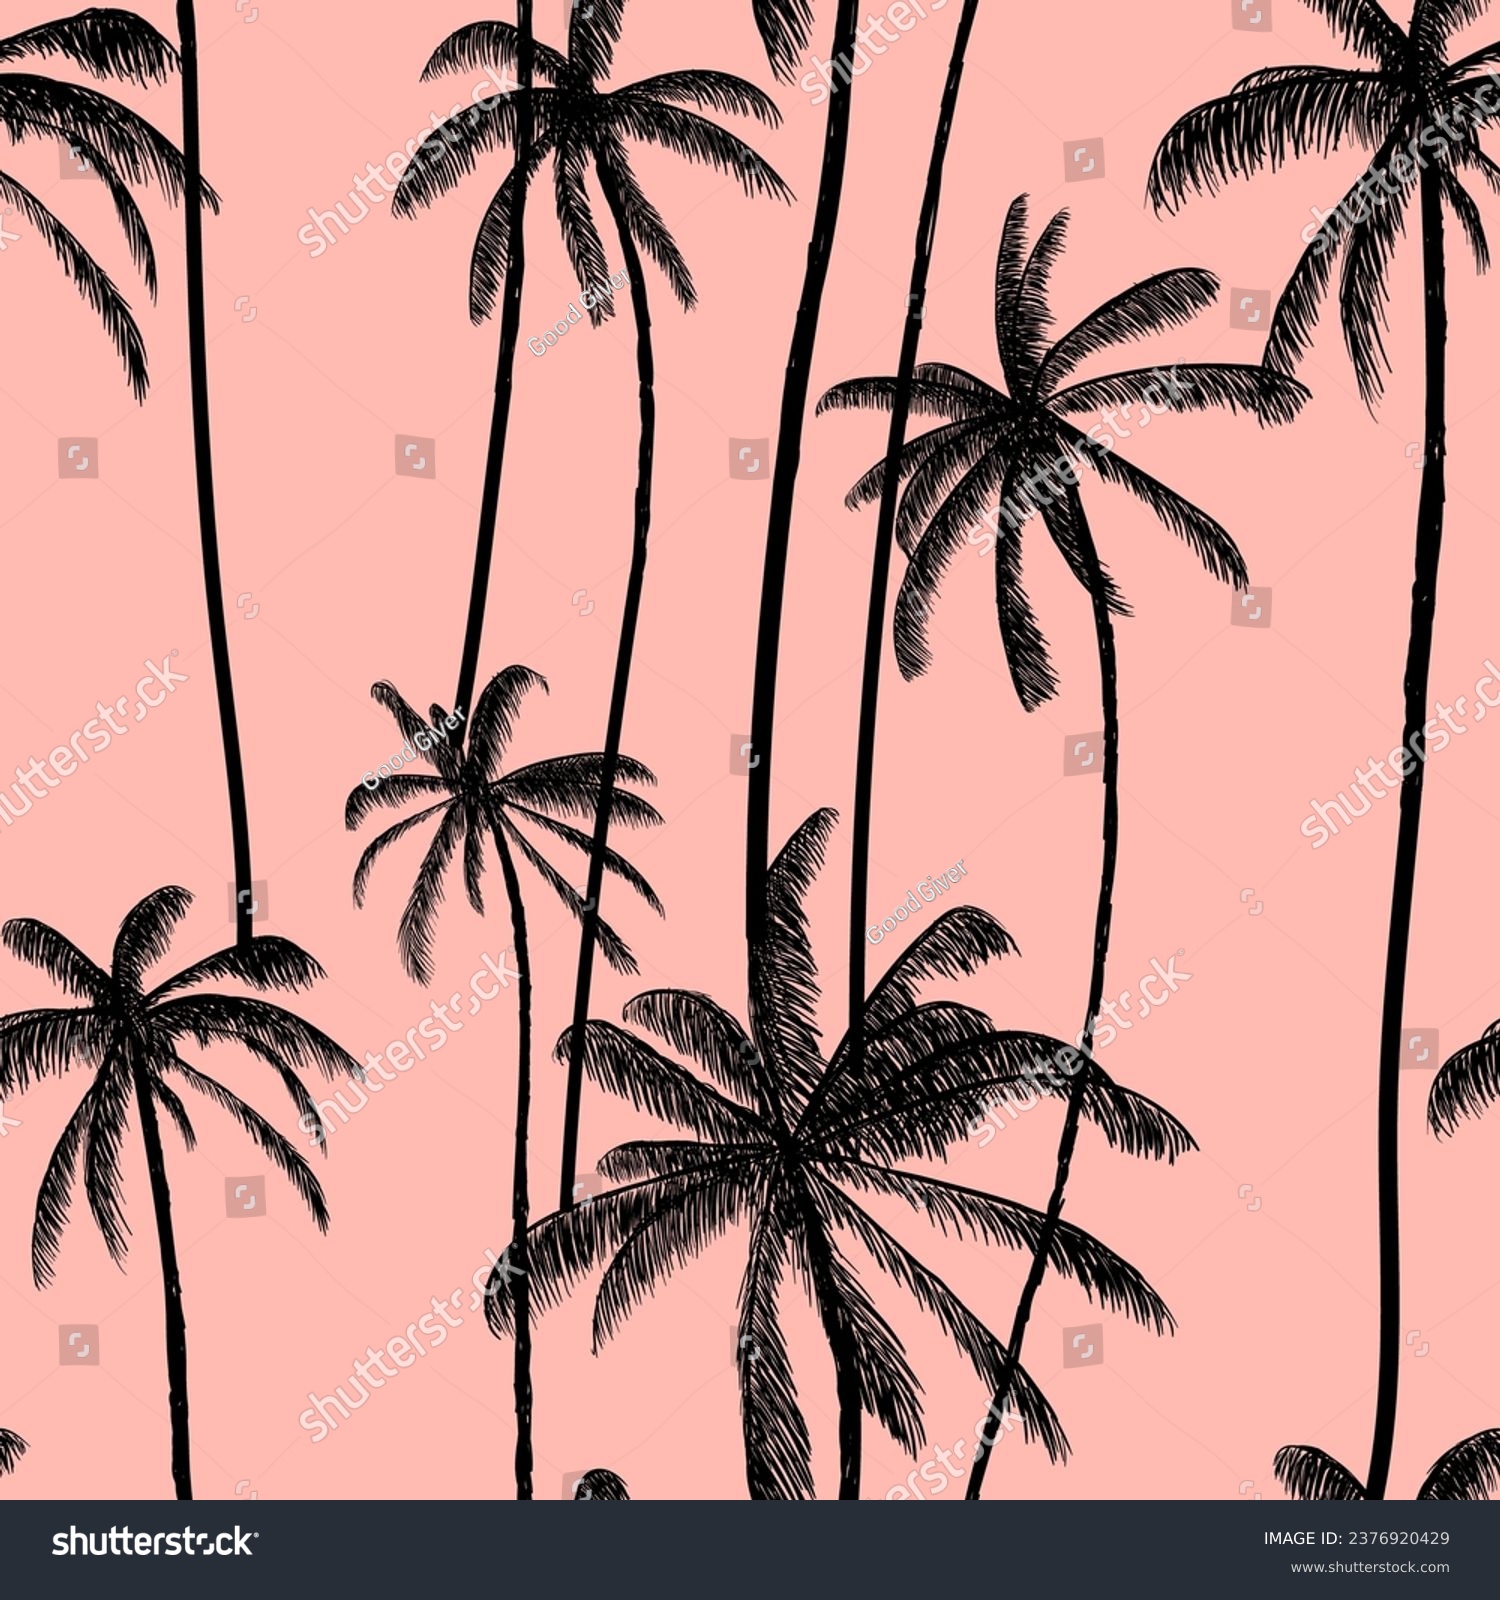 SVG of Coconuts palms on beach seamless pattern.  Botanical pale pink background. Hawaiian beach swimwear texture. Vector illustration background. svg